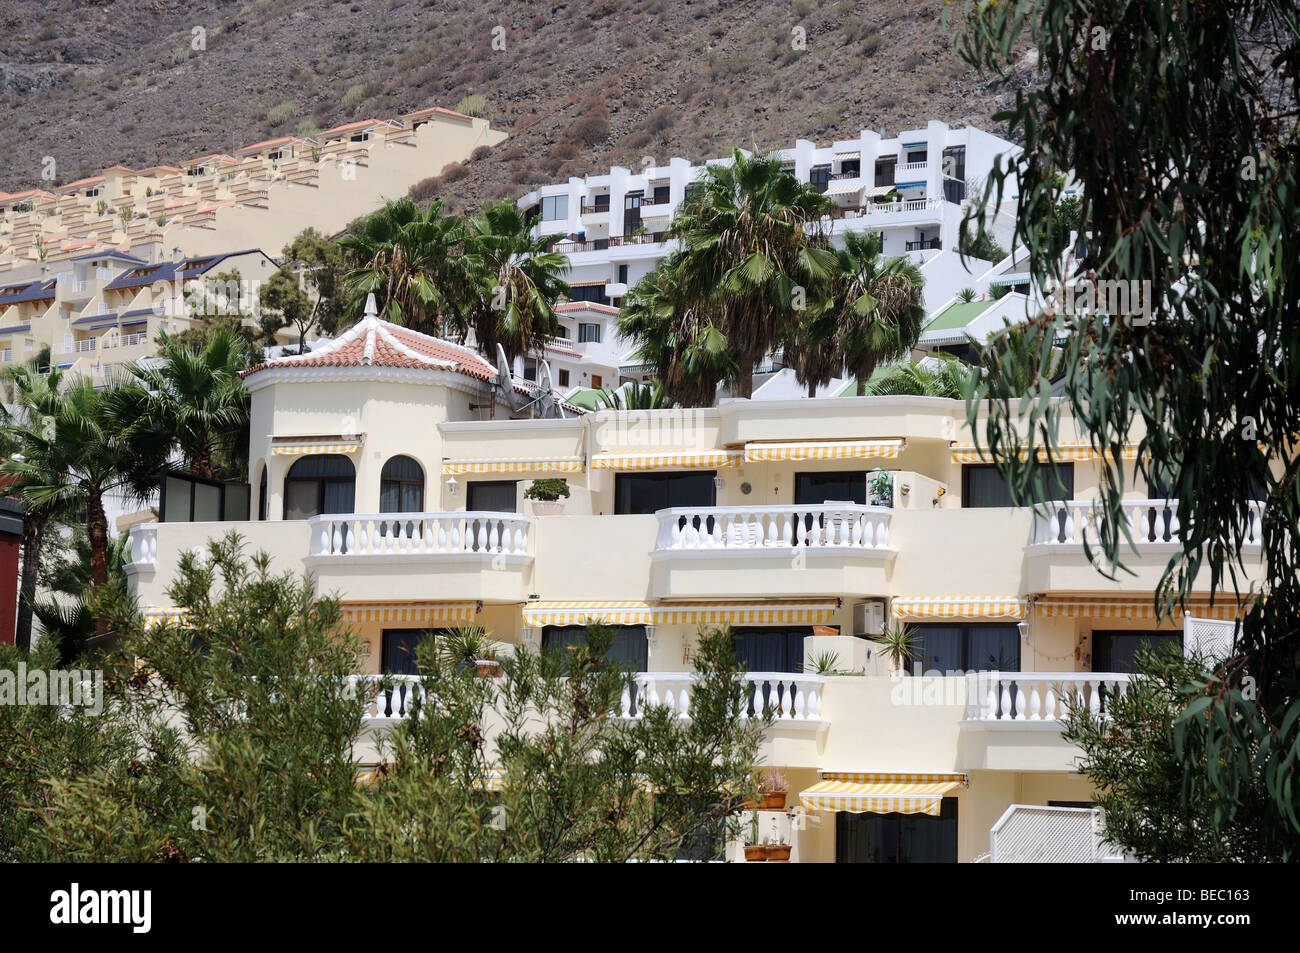 Hotel buildings in Los Gigantes, Canary Island Tenerife, Spain Stock Photo